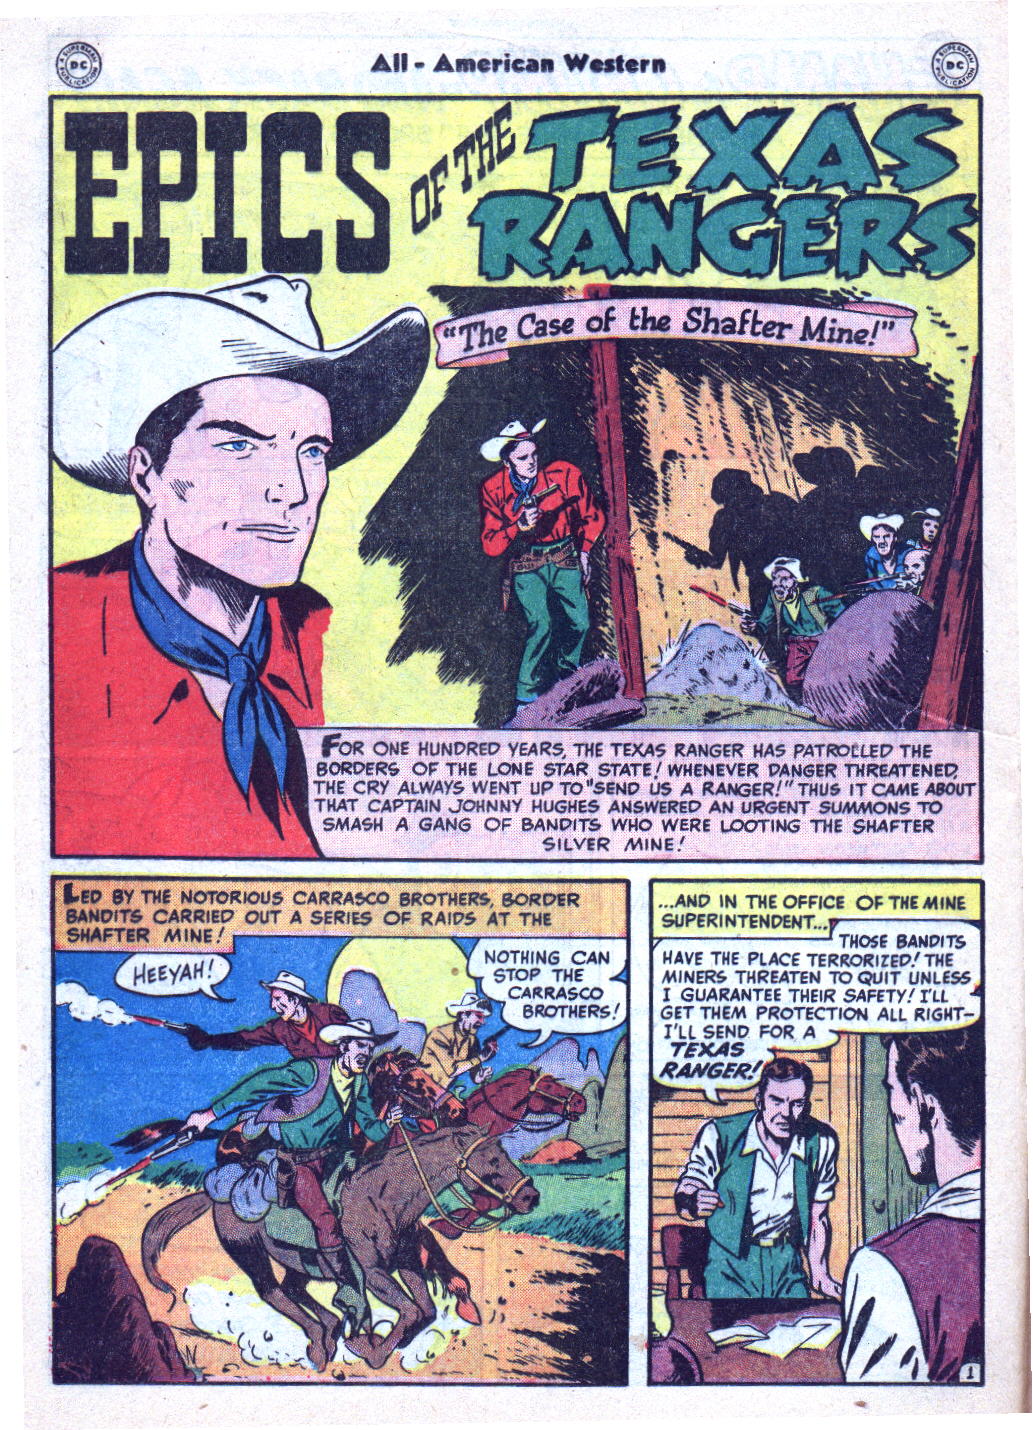 Read online All-American Western comic -  Issue #109 - 24